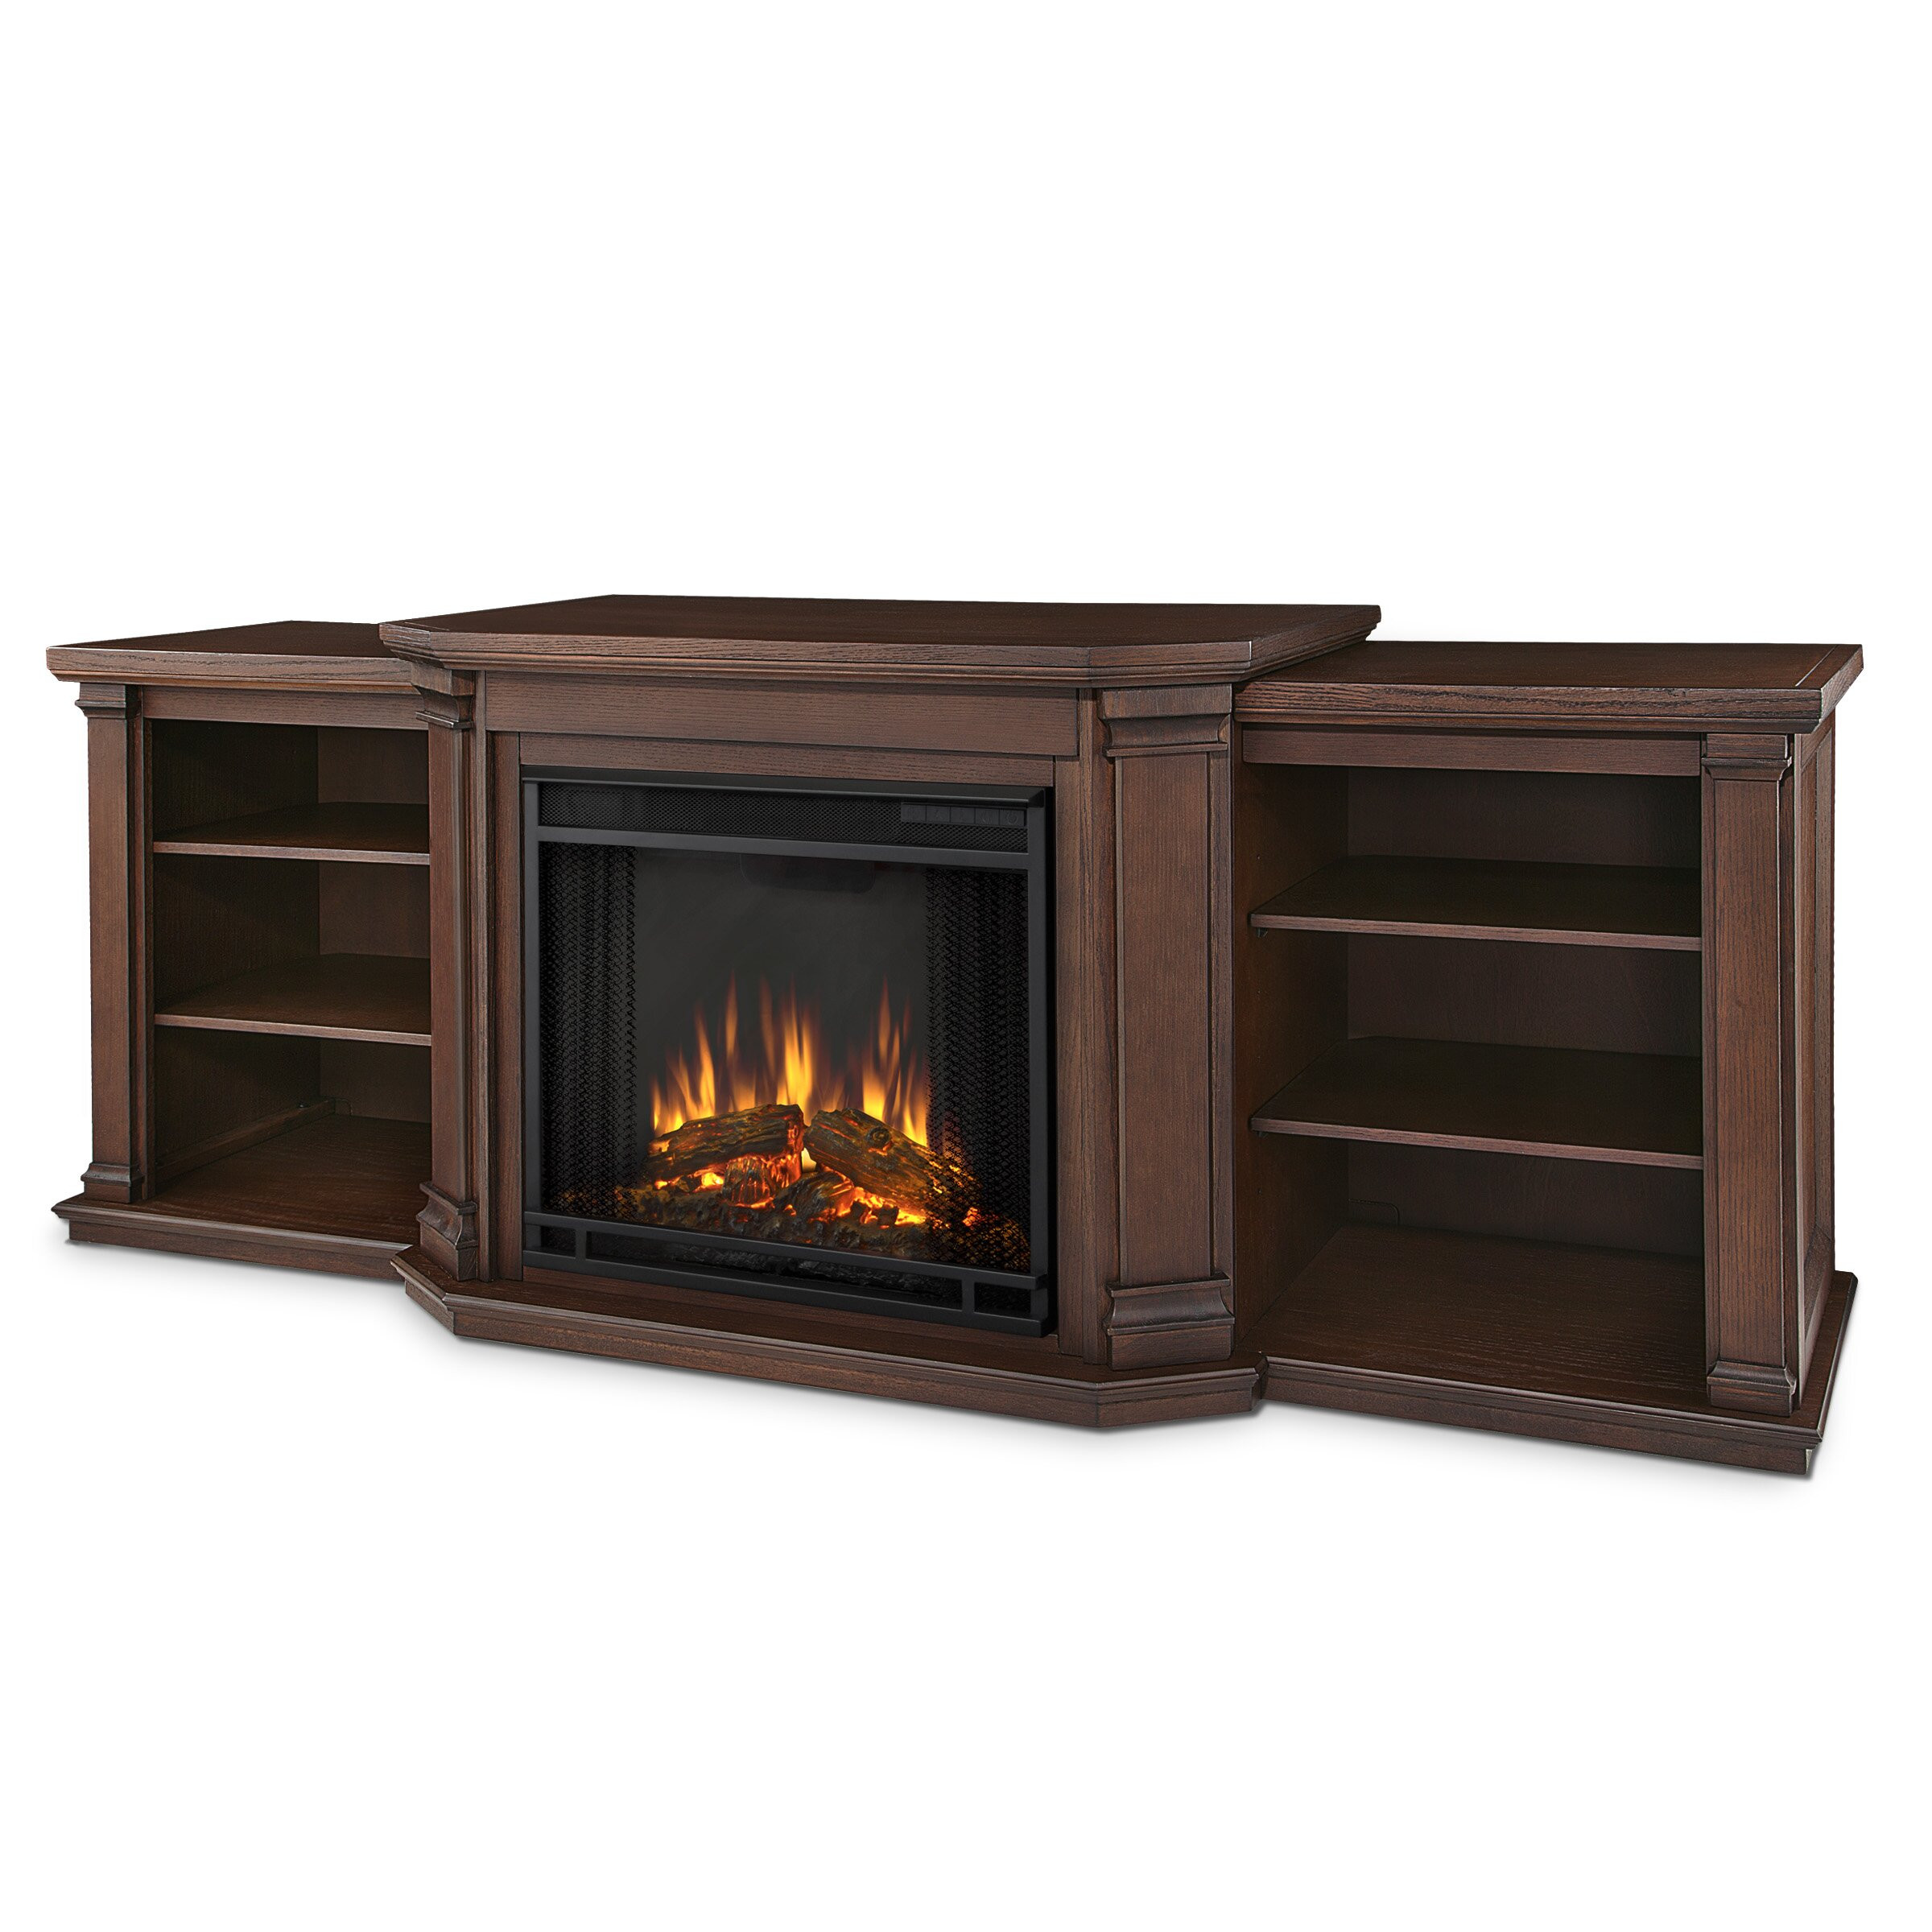 Tv Electric Fireplace
 Real Flame Valmont TV Stand with Electric Fireplace